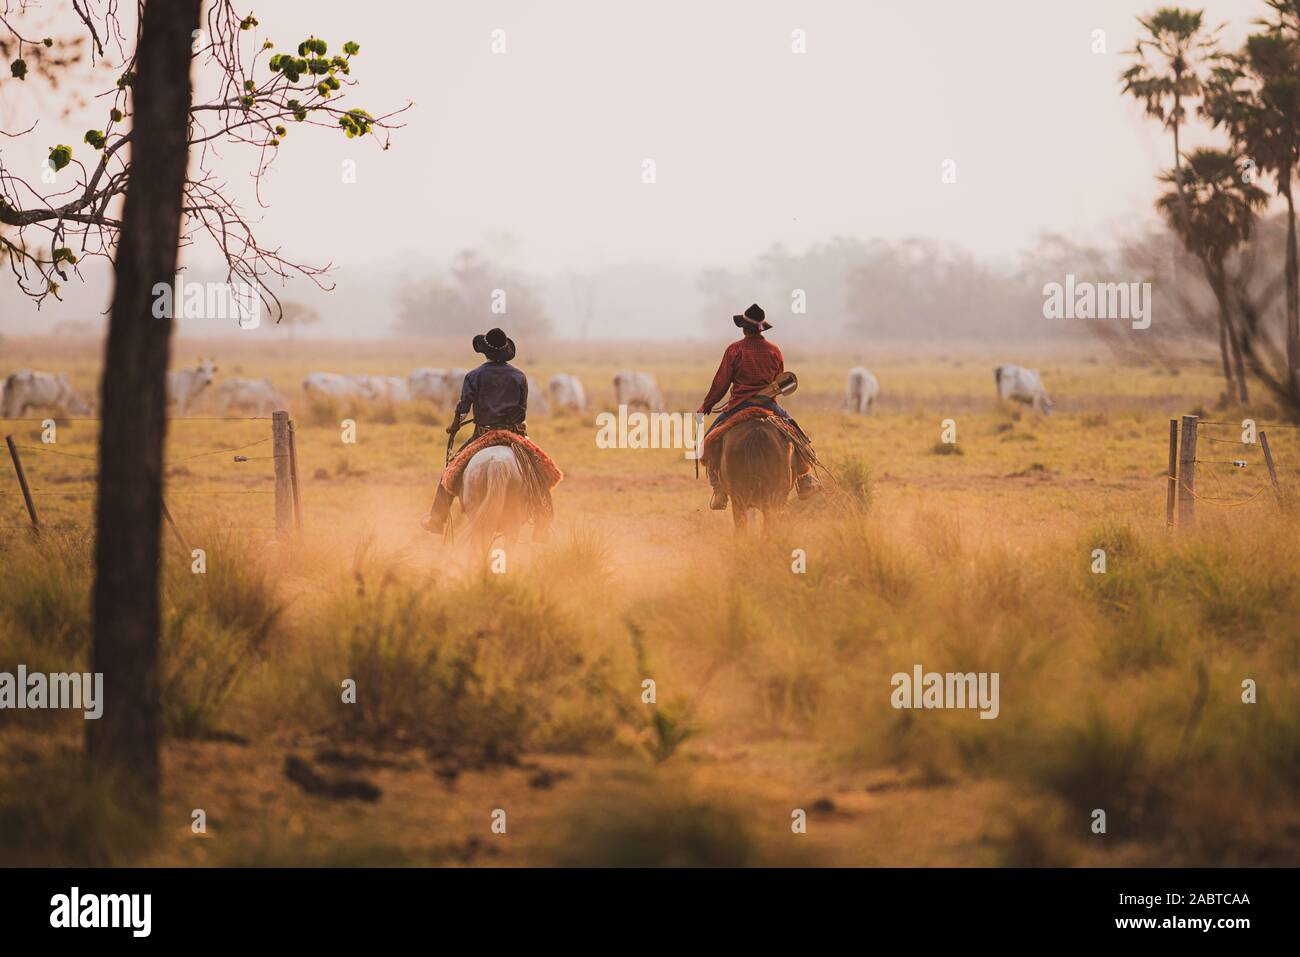 Pantaneiro cowboy working on a cattle ranch in South Pantanal Stock Photo